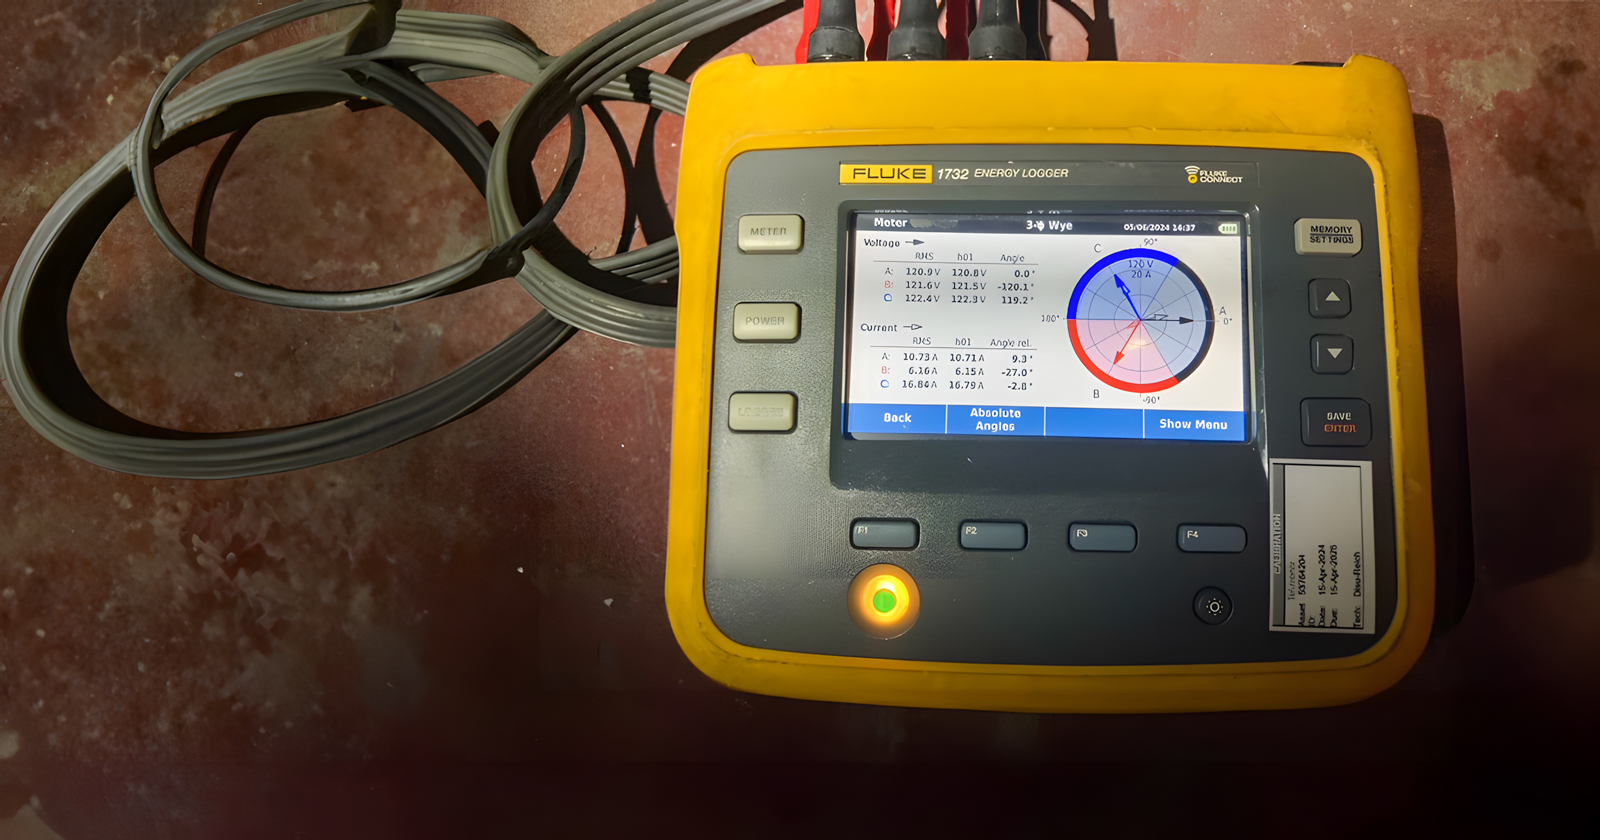 Fluke energy logger powered on used for performing meter testing and calibration